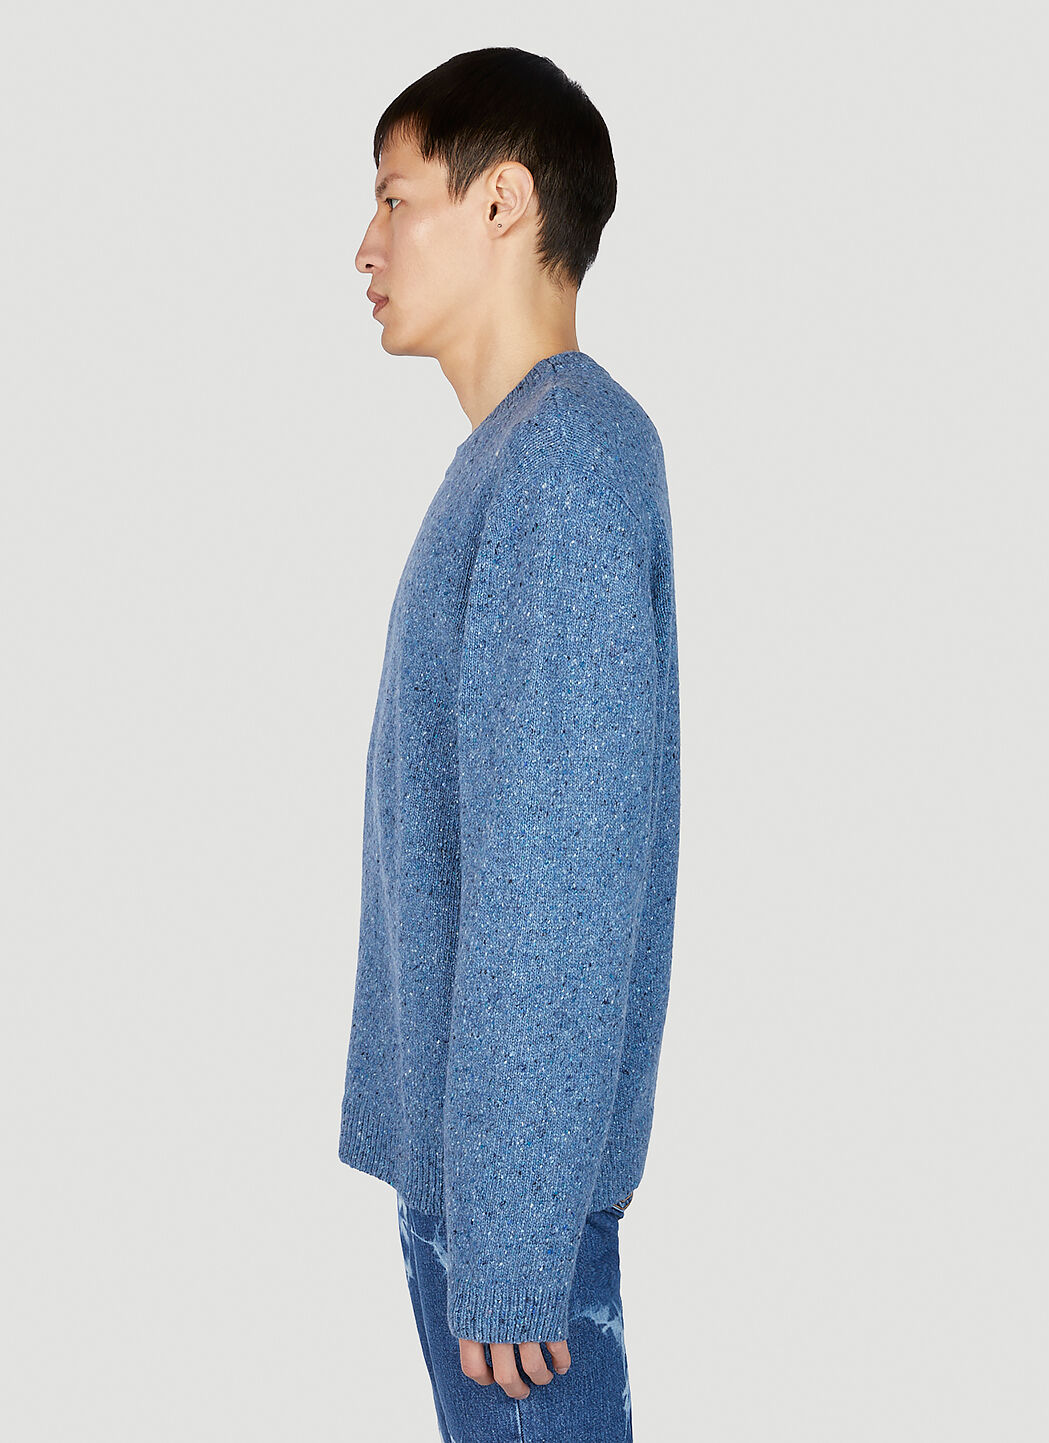 A.P.C. Chandler Sweater in Blue | LN-CC®